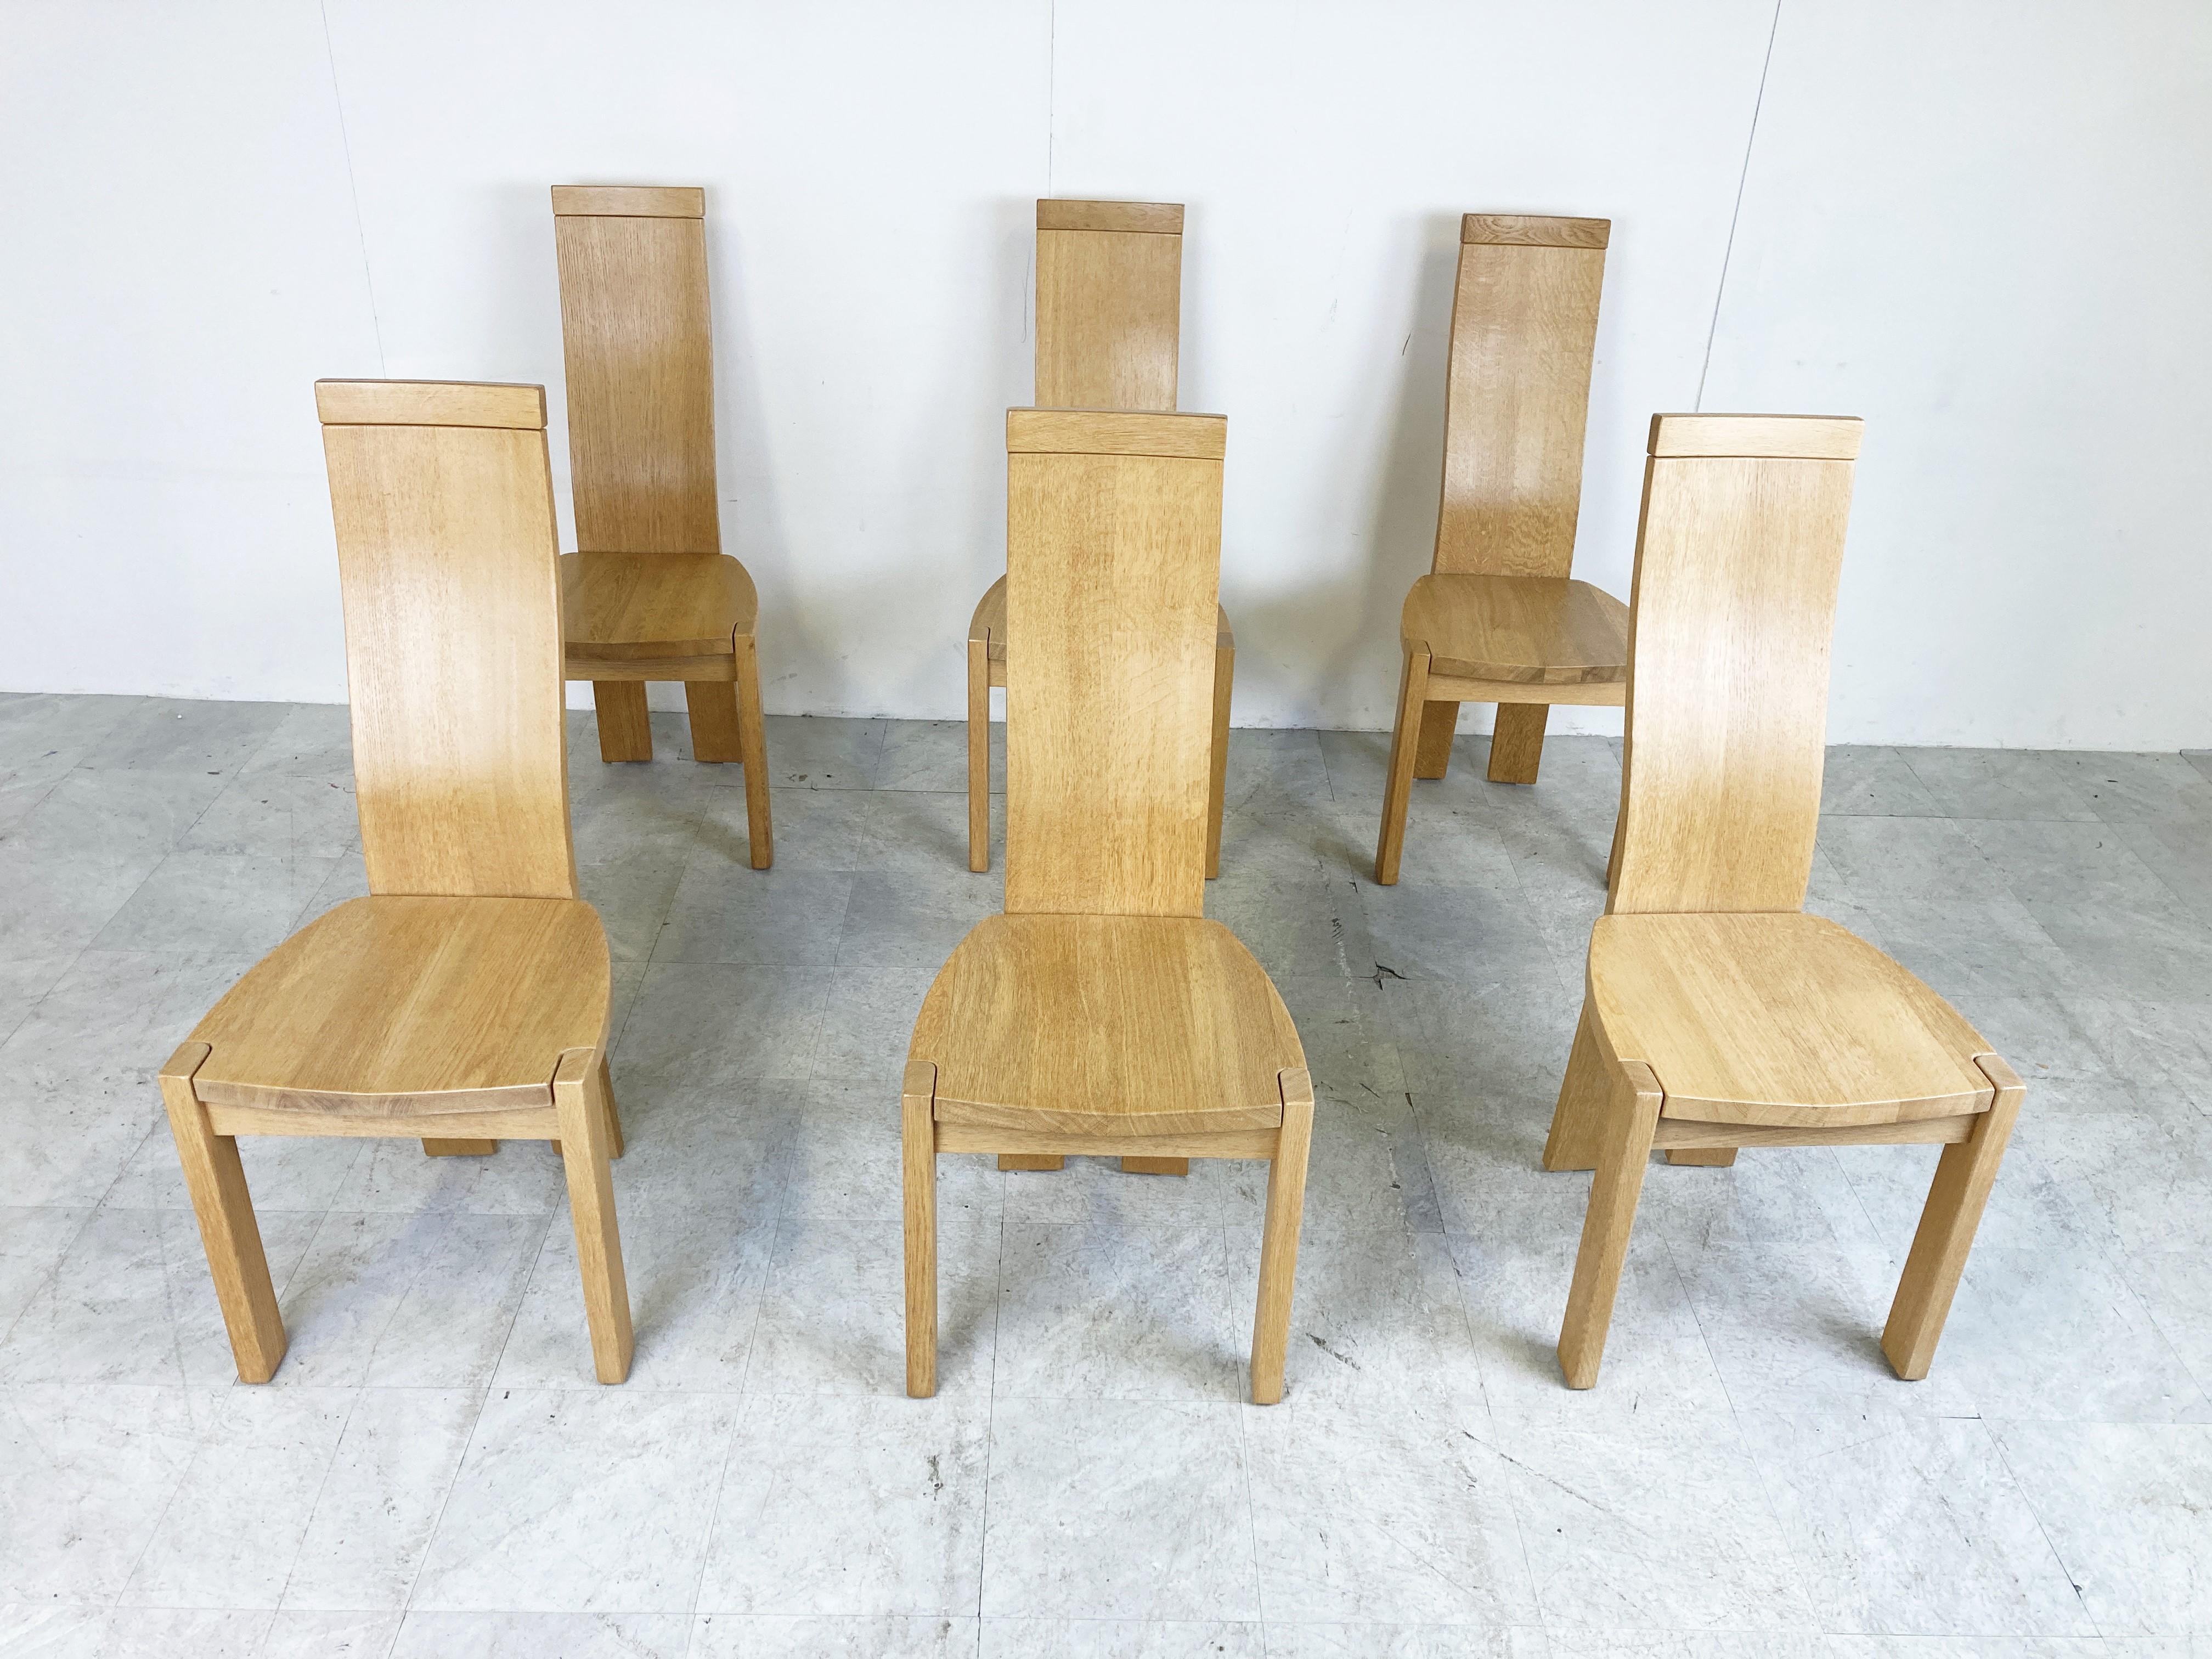 Elegant, sculptural high back dining chairs by Vanden Berghe Pauvers.

Very good condition.

Dimensions:
Height: 108cm/42.51